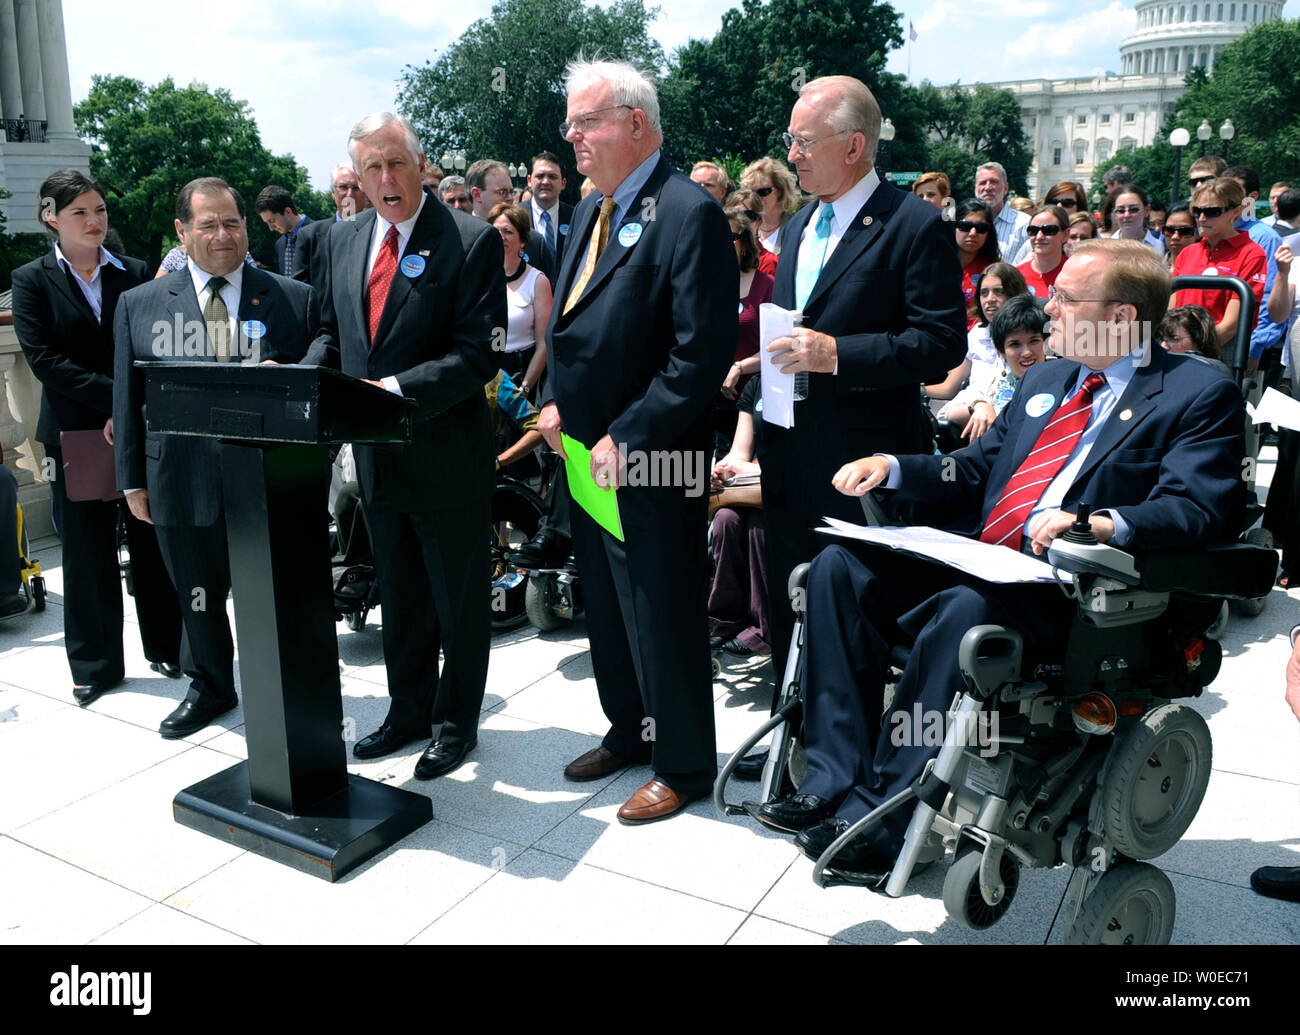 House Majority Leader Steny Hoyer (D-MD) (3rd-L), joined by Rep. Jim Langevin (D-RI) (R), Rep. Howard McKeon (R-CA) (2nd-R), Rep. James Sensenbrenner (R-WI) (C), Rep. Jerrold Nadler (D-NY) (2nd-L), Elizabeth Goldberg, chair of the Epilepsy Foundation Youth Council, (L) and members of the disabled community, speaks at a press conference on the upcoming House vote on the Americans with Disabilities Act Amendments Act in Washington on June 25, 2008. (UPI Photo/Kevin Dietsch) Stock Photo